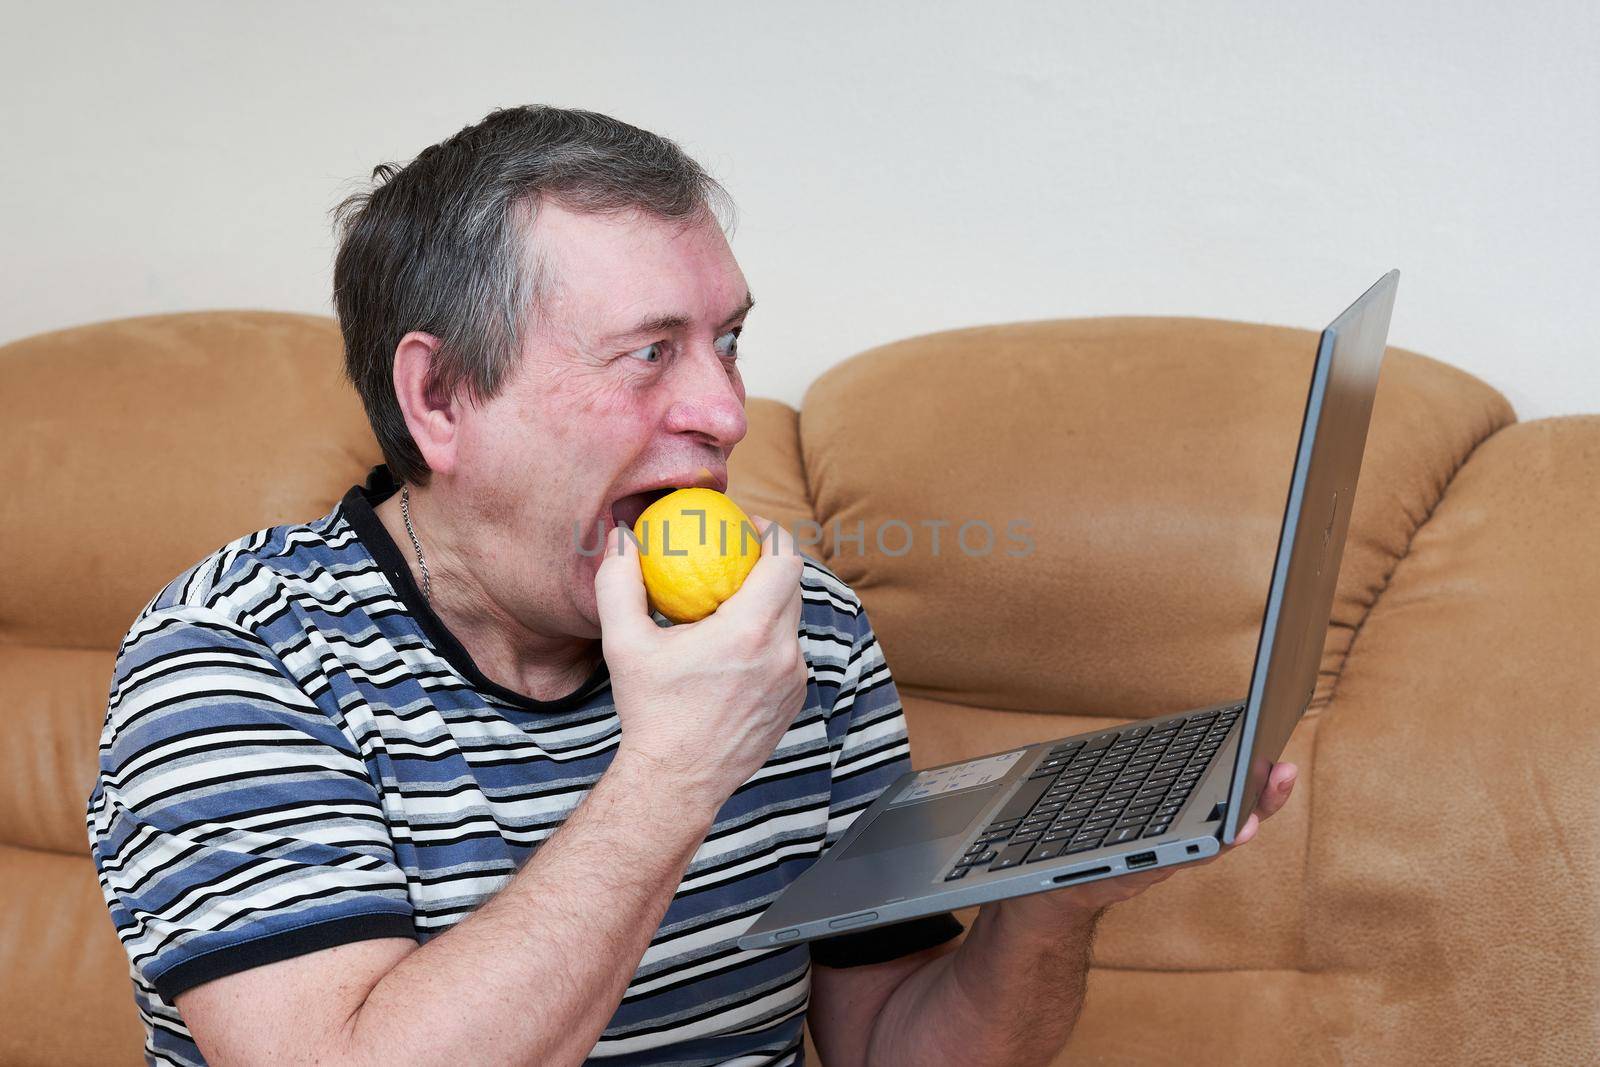 Freak eats lemon while holding a laptop while sitting on the couch by vizland